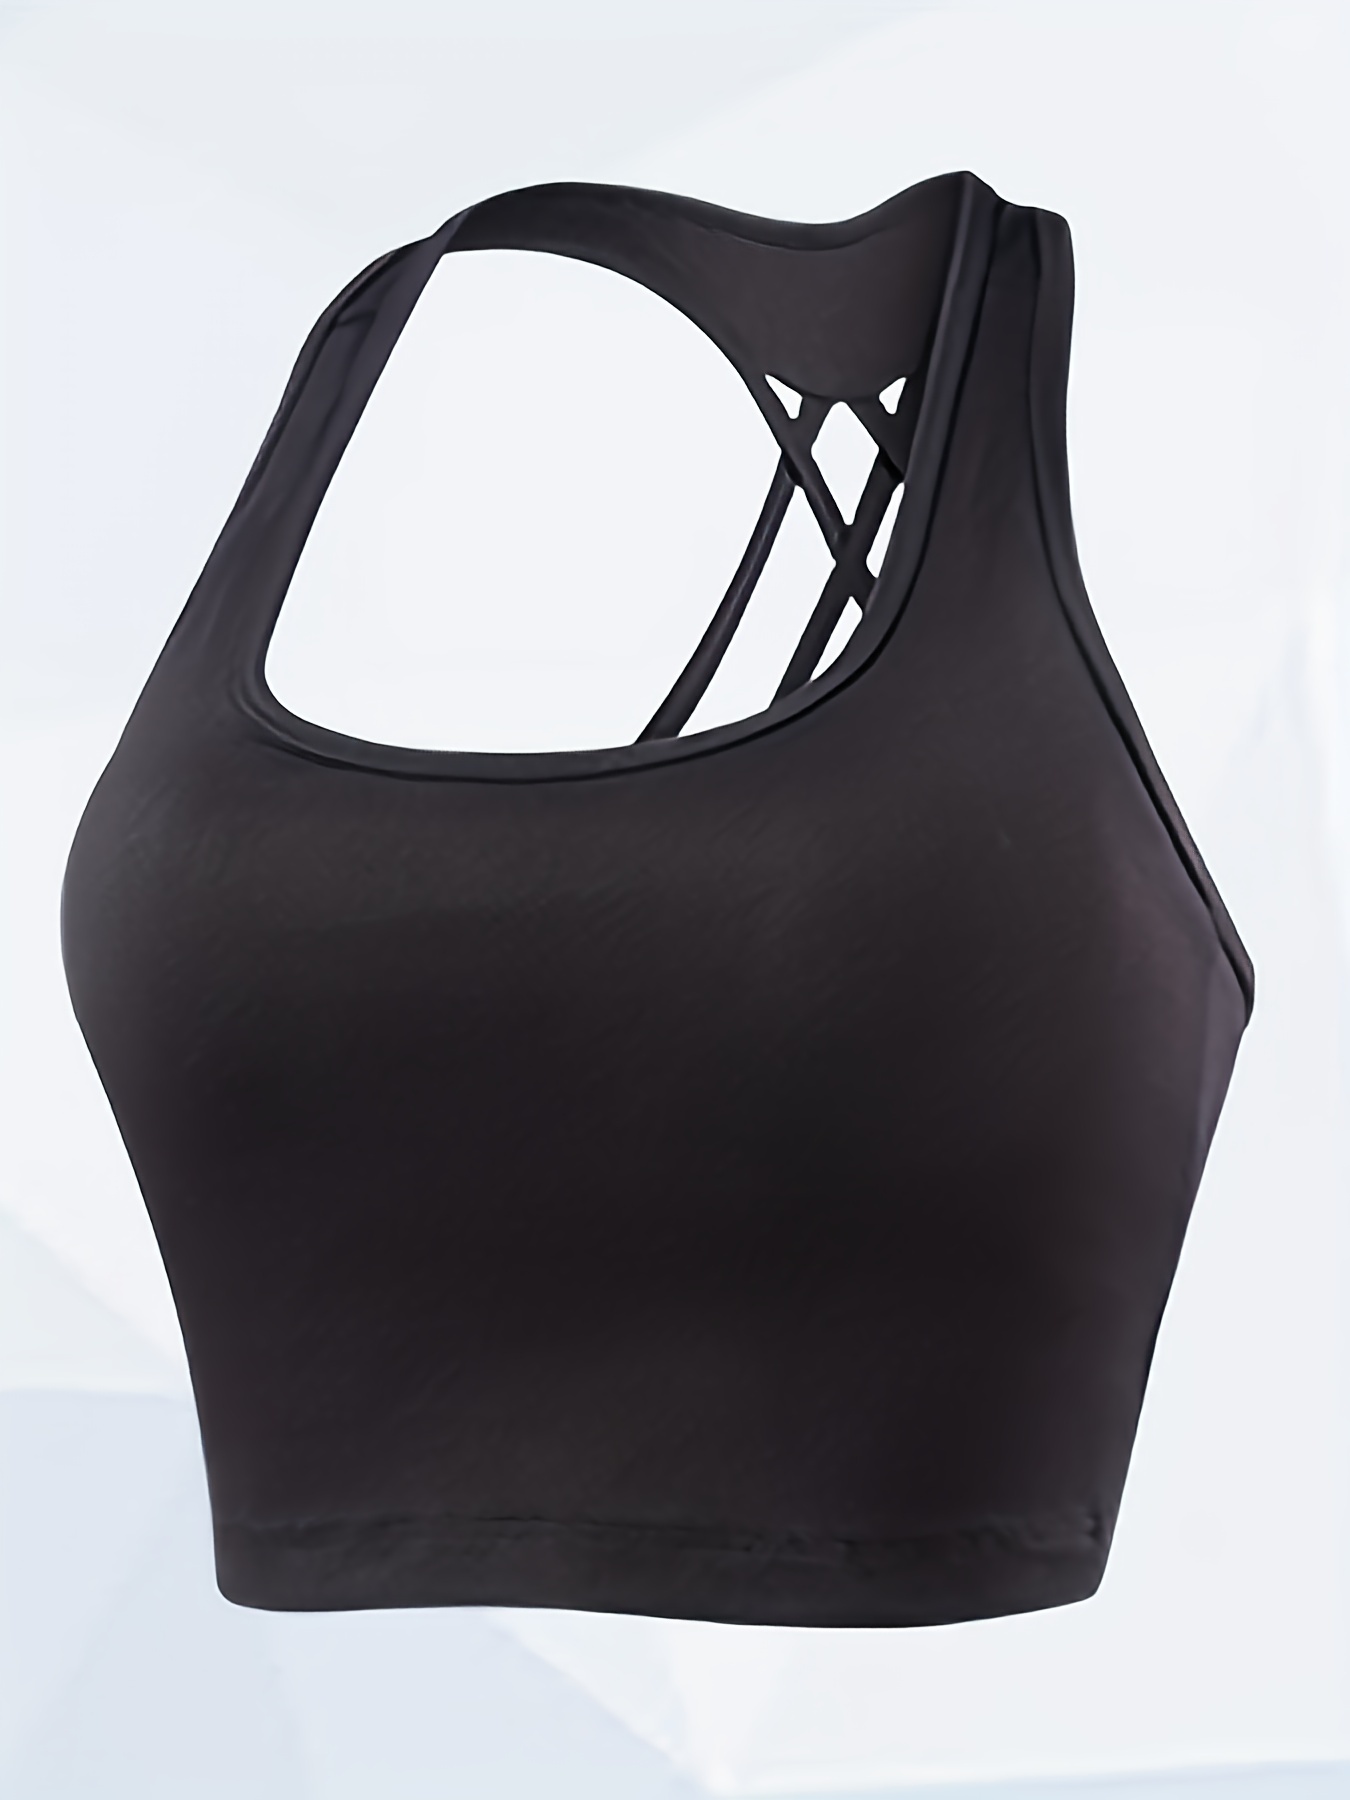 THE GYM PEOPLE Womens' Sports Bra Longline Wirefree Padded with